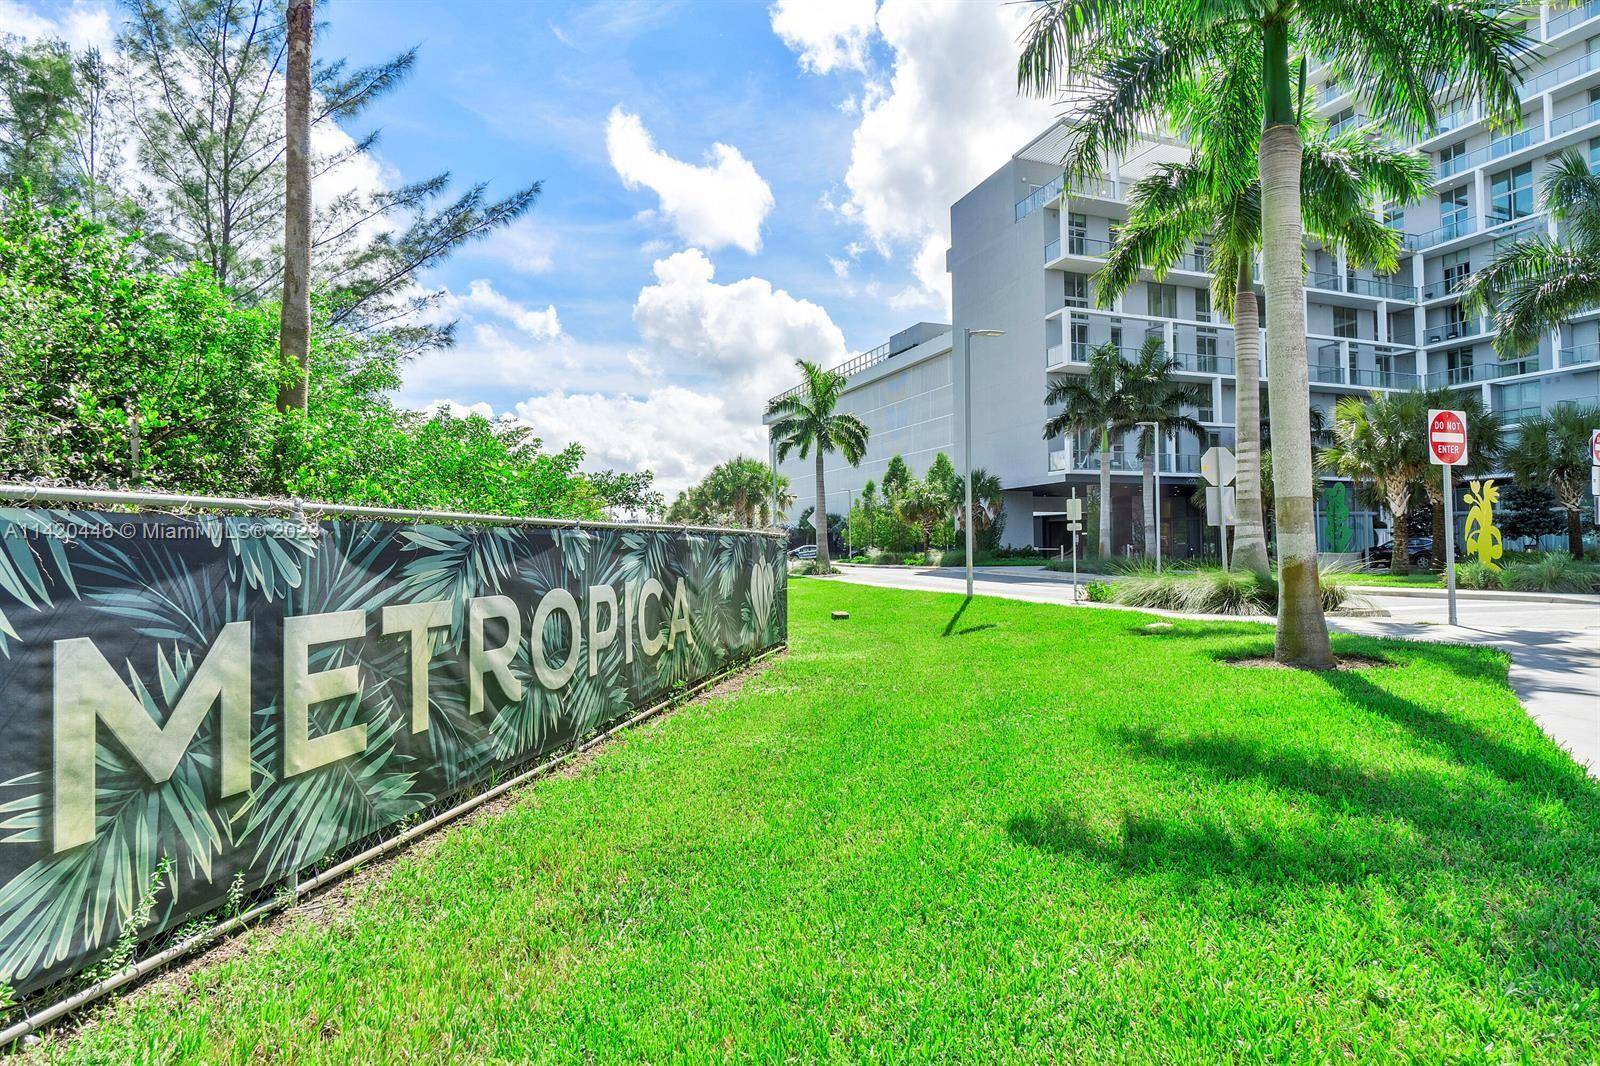 Spacious, beautiful and unique 3bed, 3 bath plus den unit, with amazing Everglades views from huge balcony.